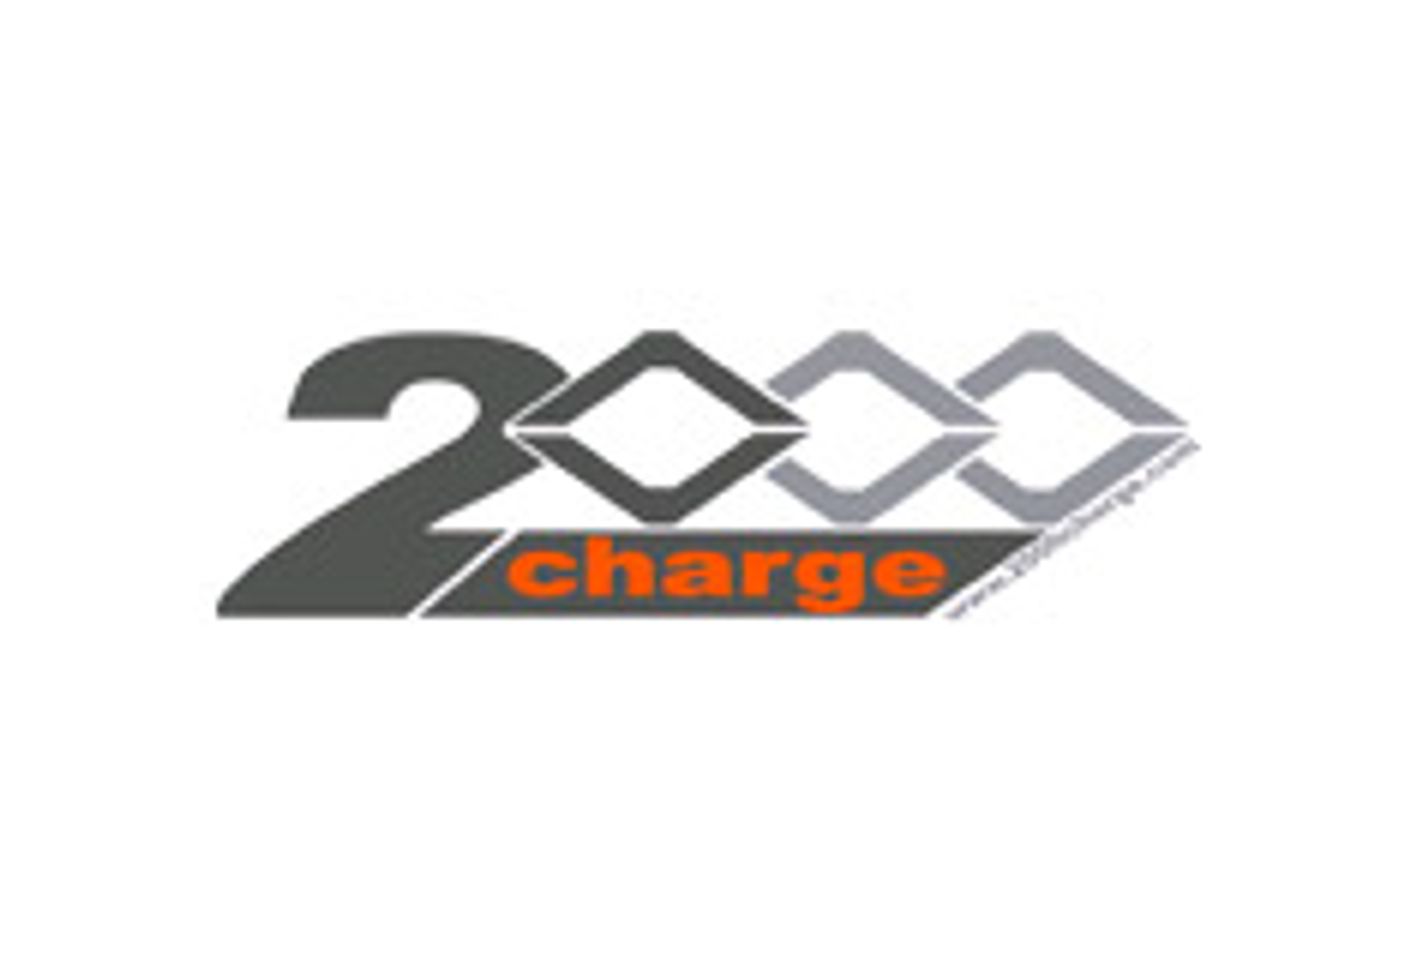 2000Charge Introduces ATM Card